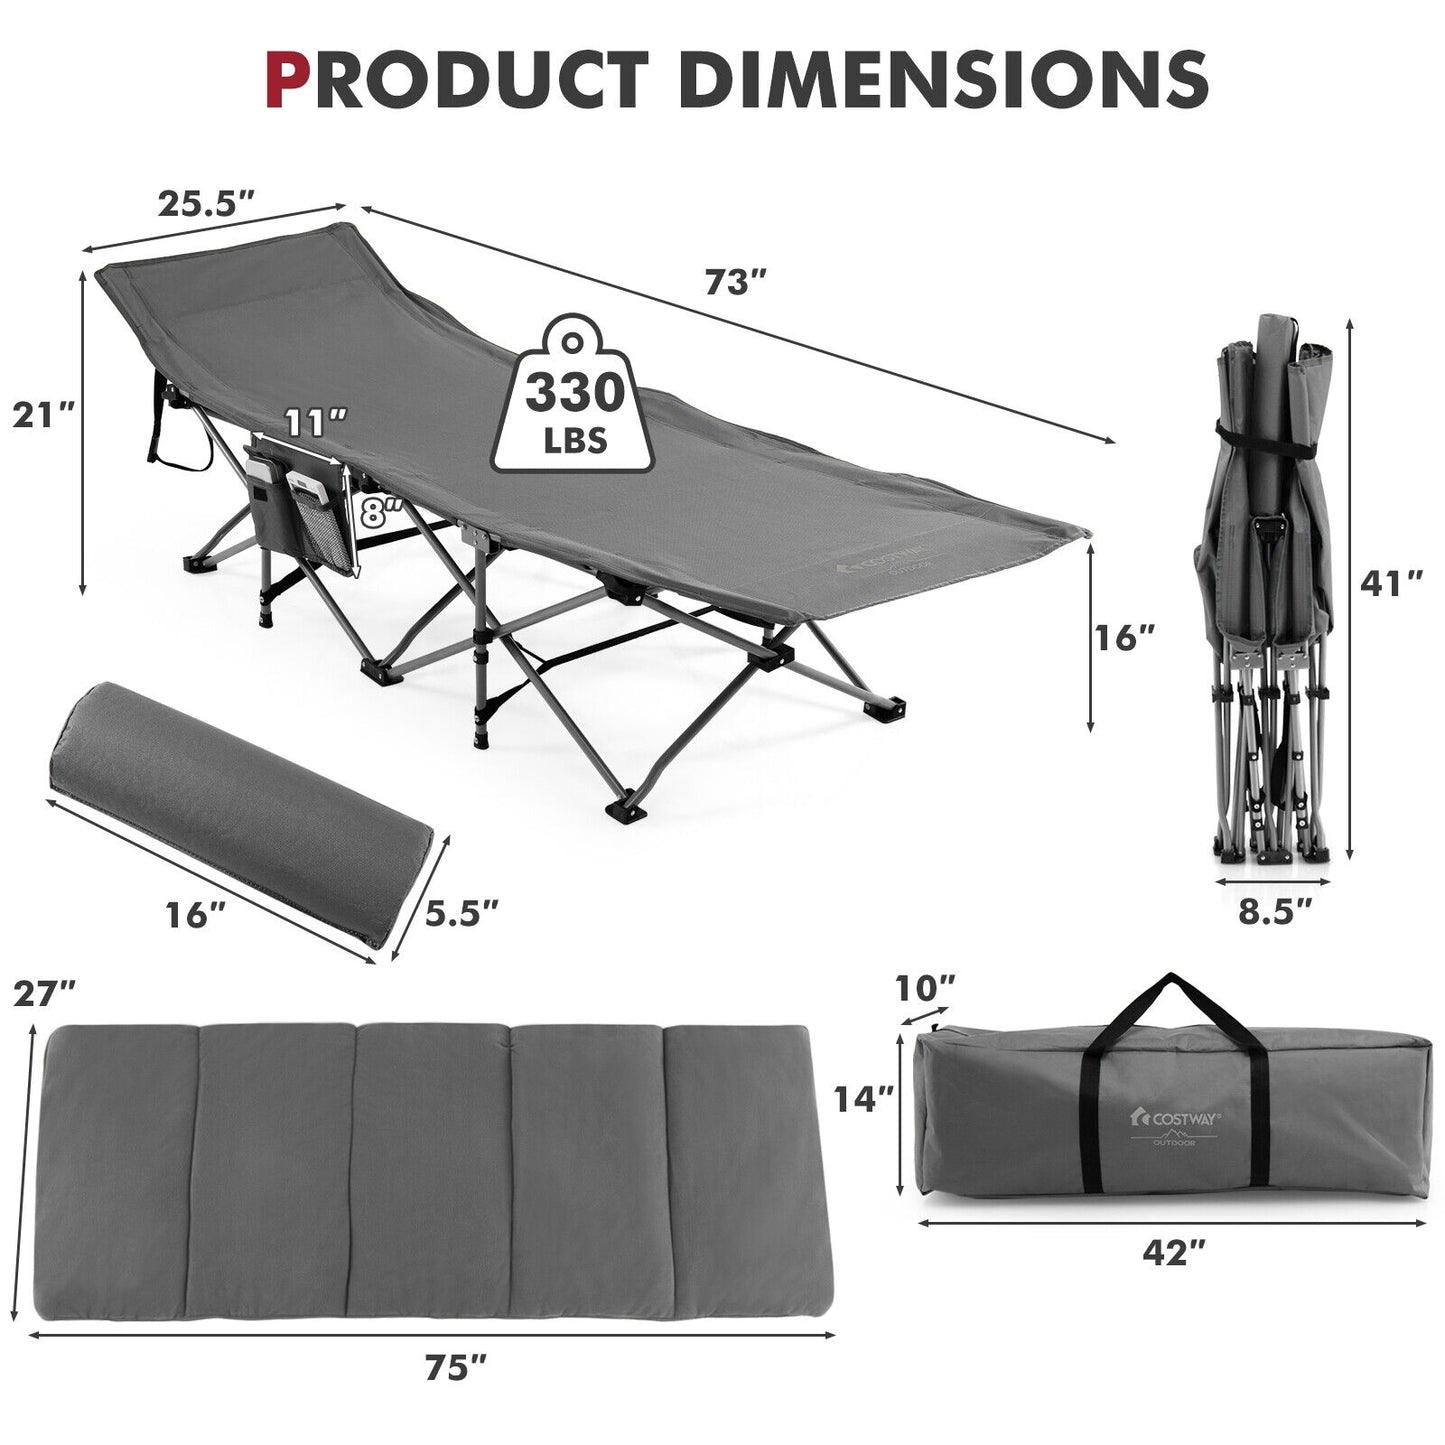 Folding Retractable Travel Camping Cot with Mattress and Carry Bag-Gray